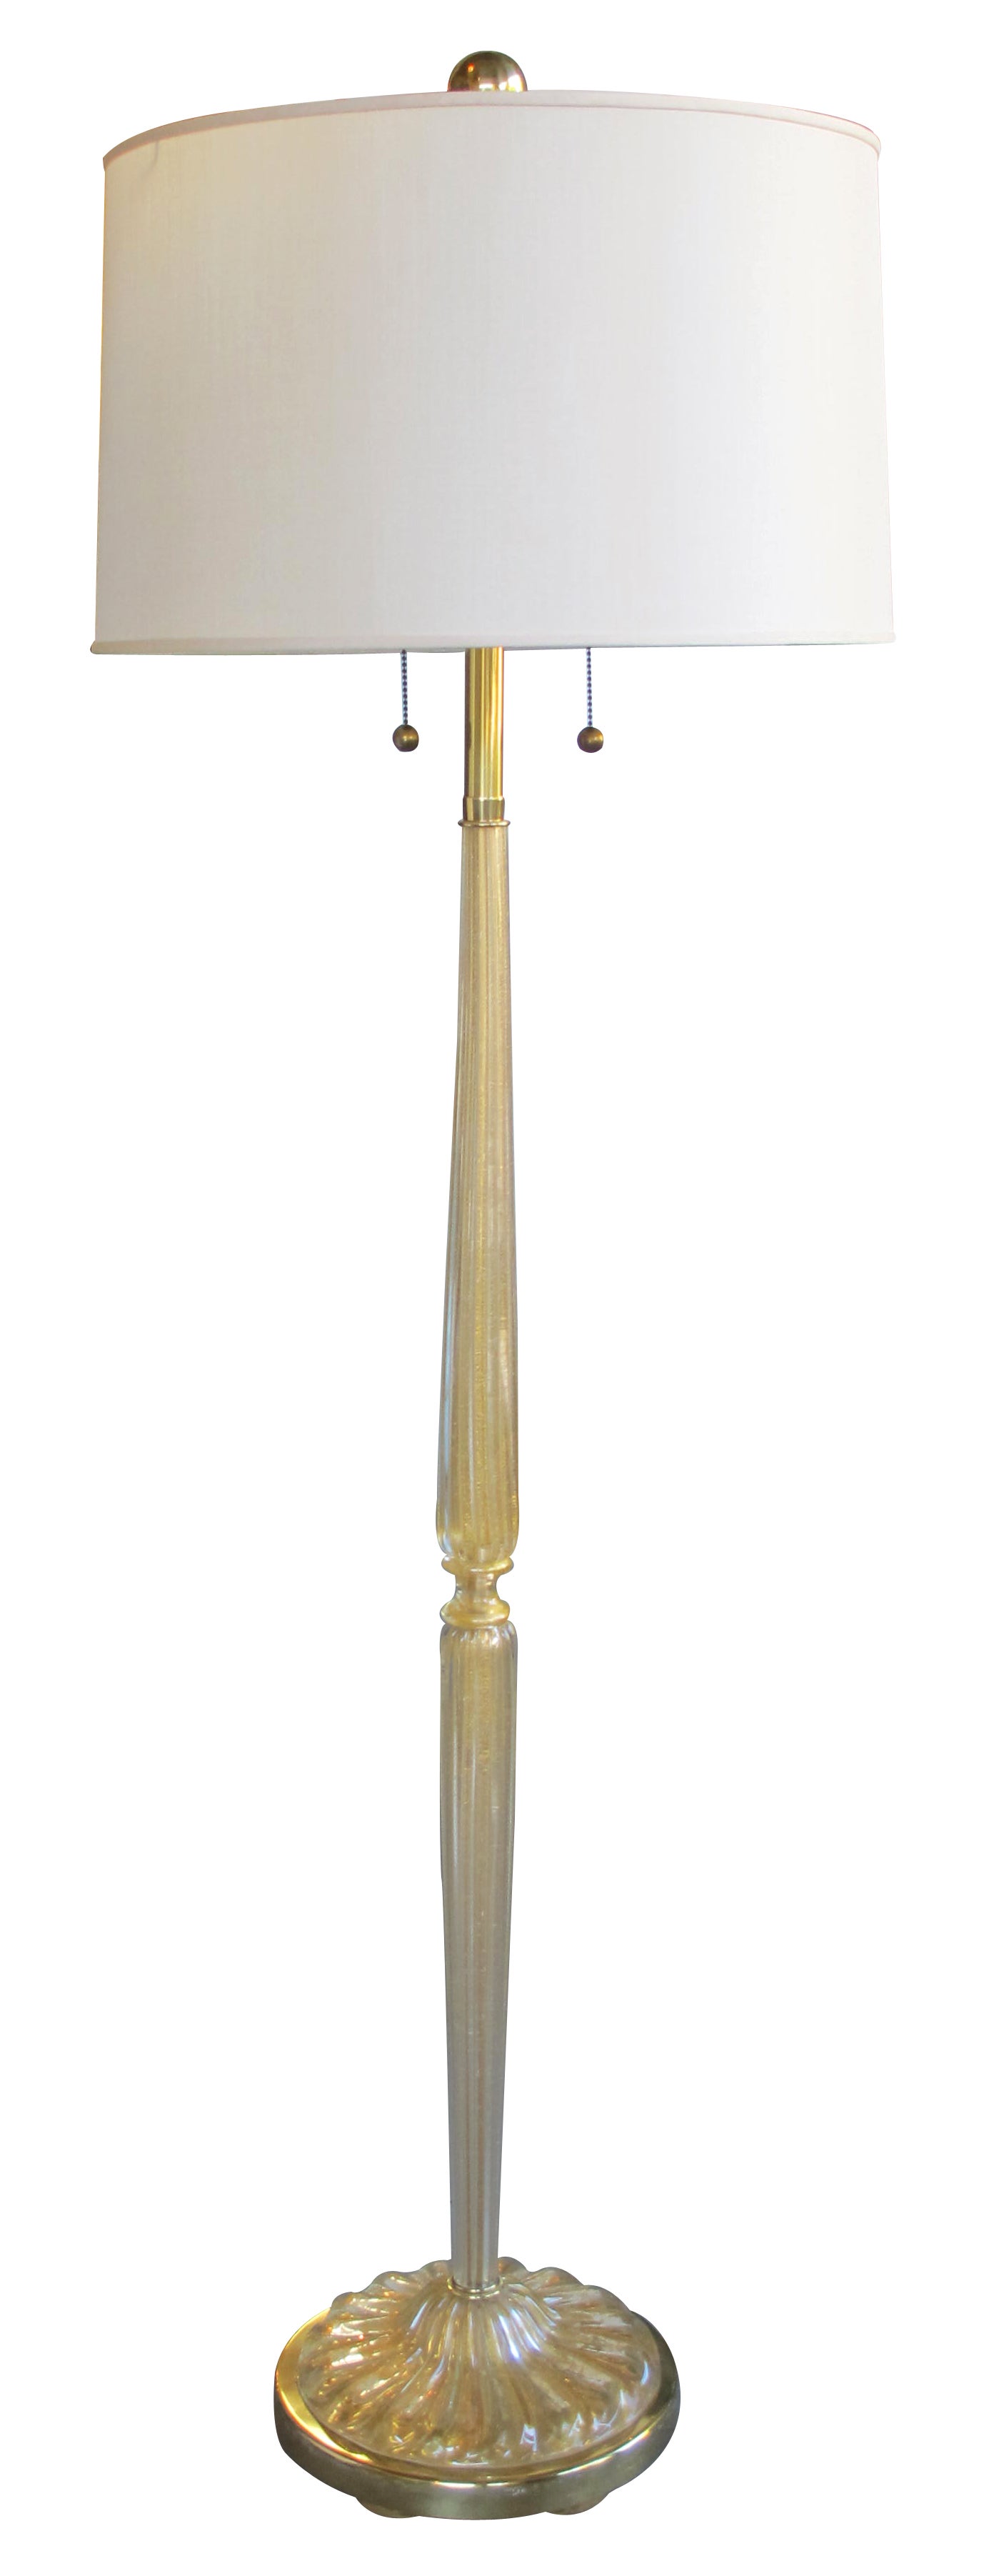 A Murano Gold Aventurine Art Glass Floor Lamp; by Marbro Lamp Co, Los Angeles